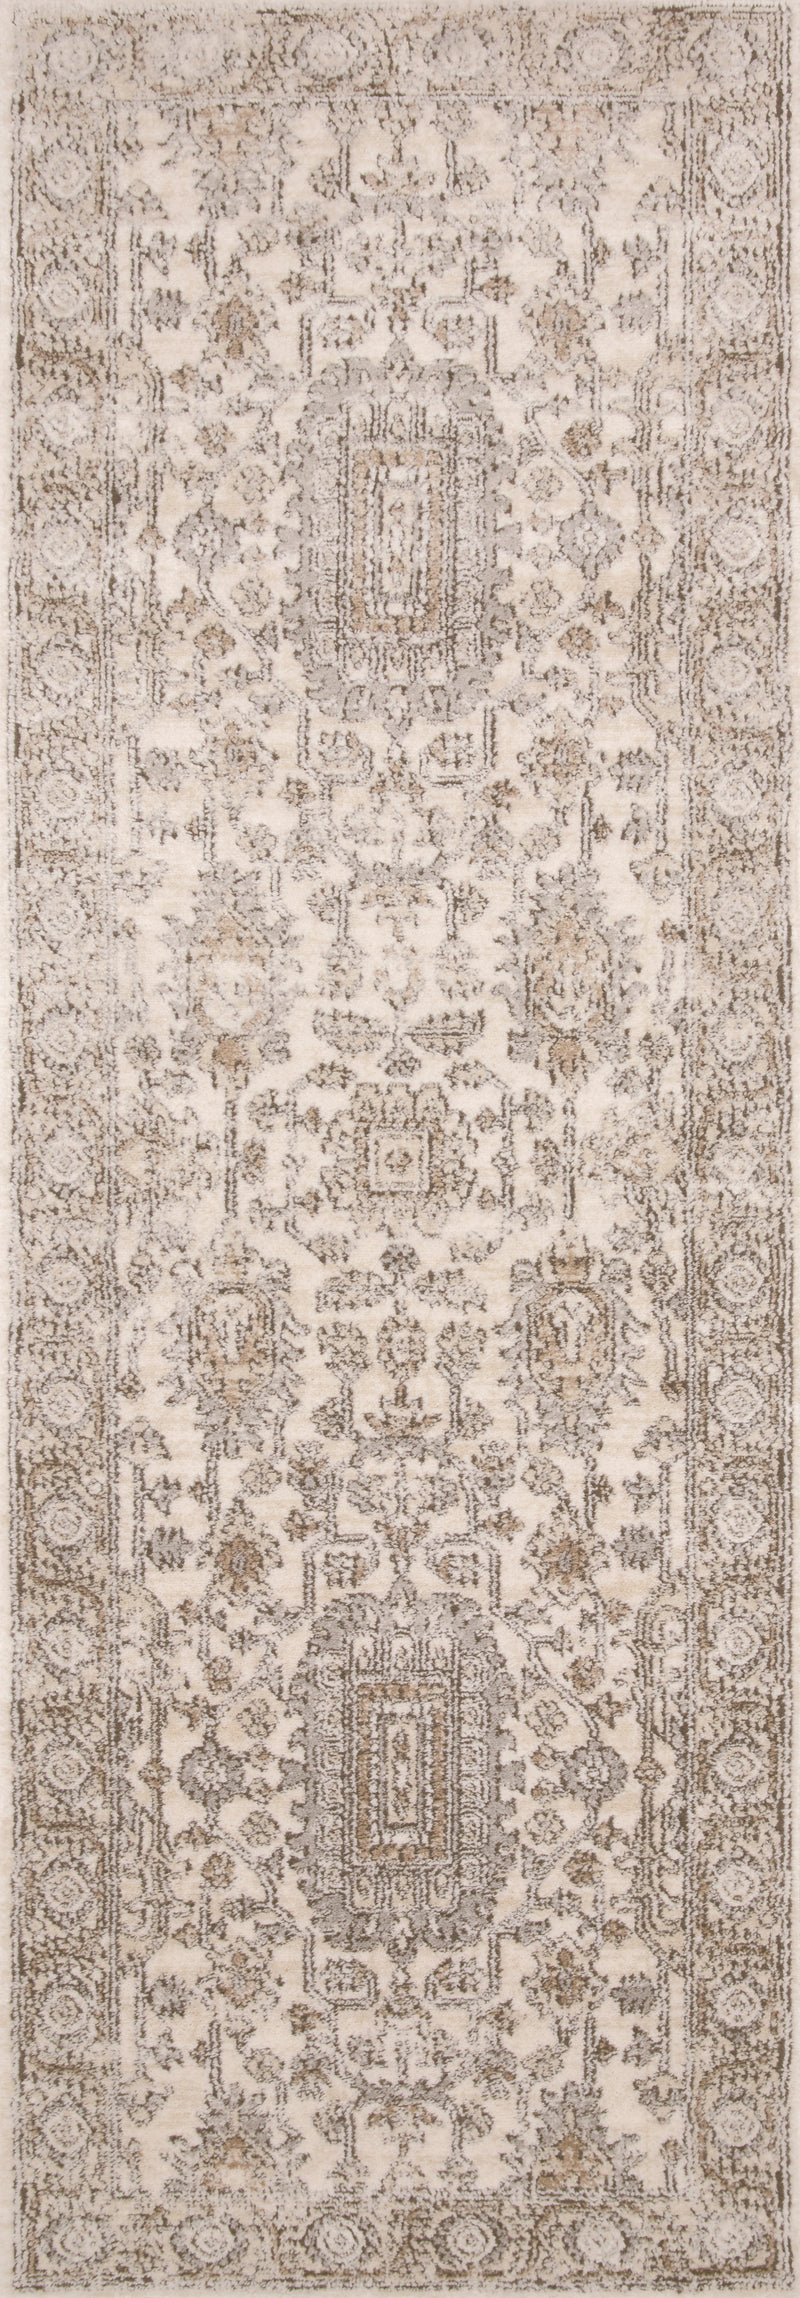 media image for Teagan Rug in Ivory / Sand by Loloi II 221